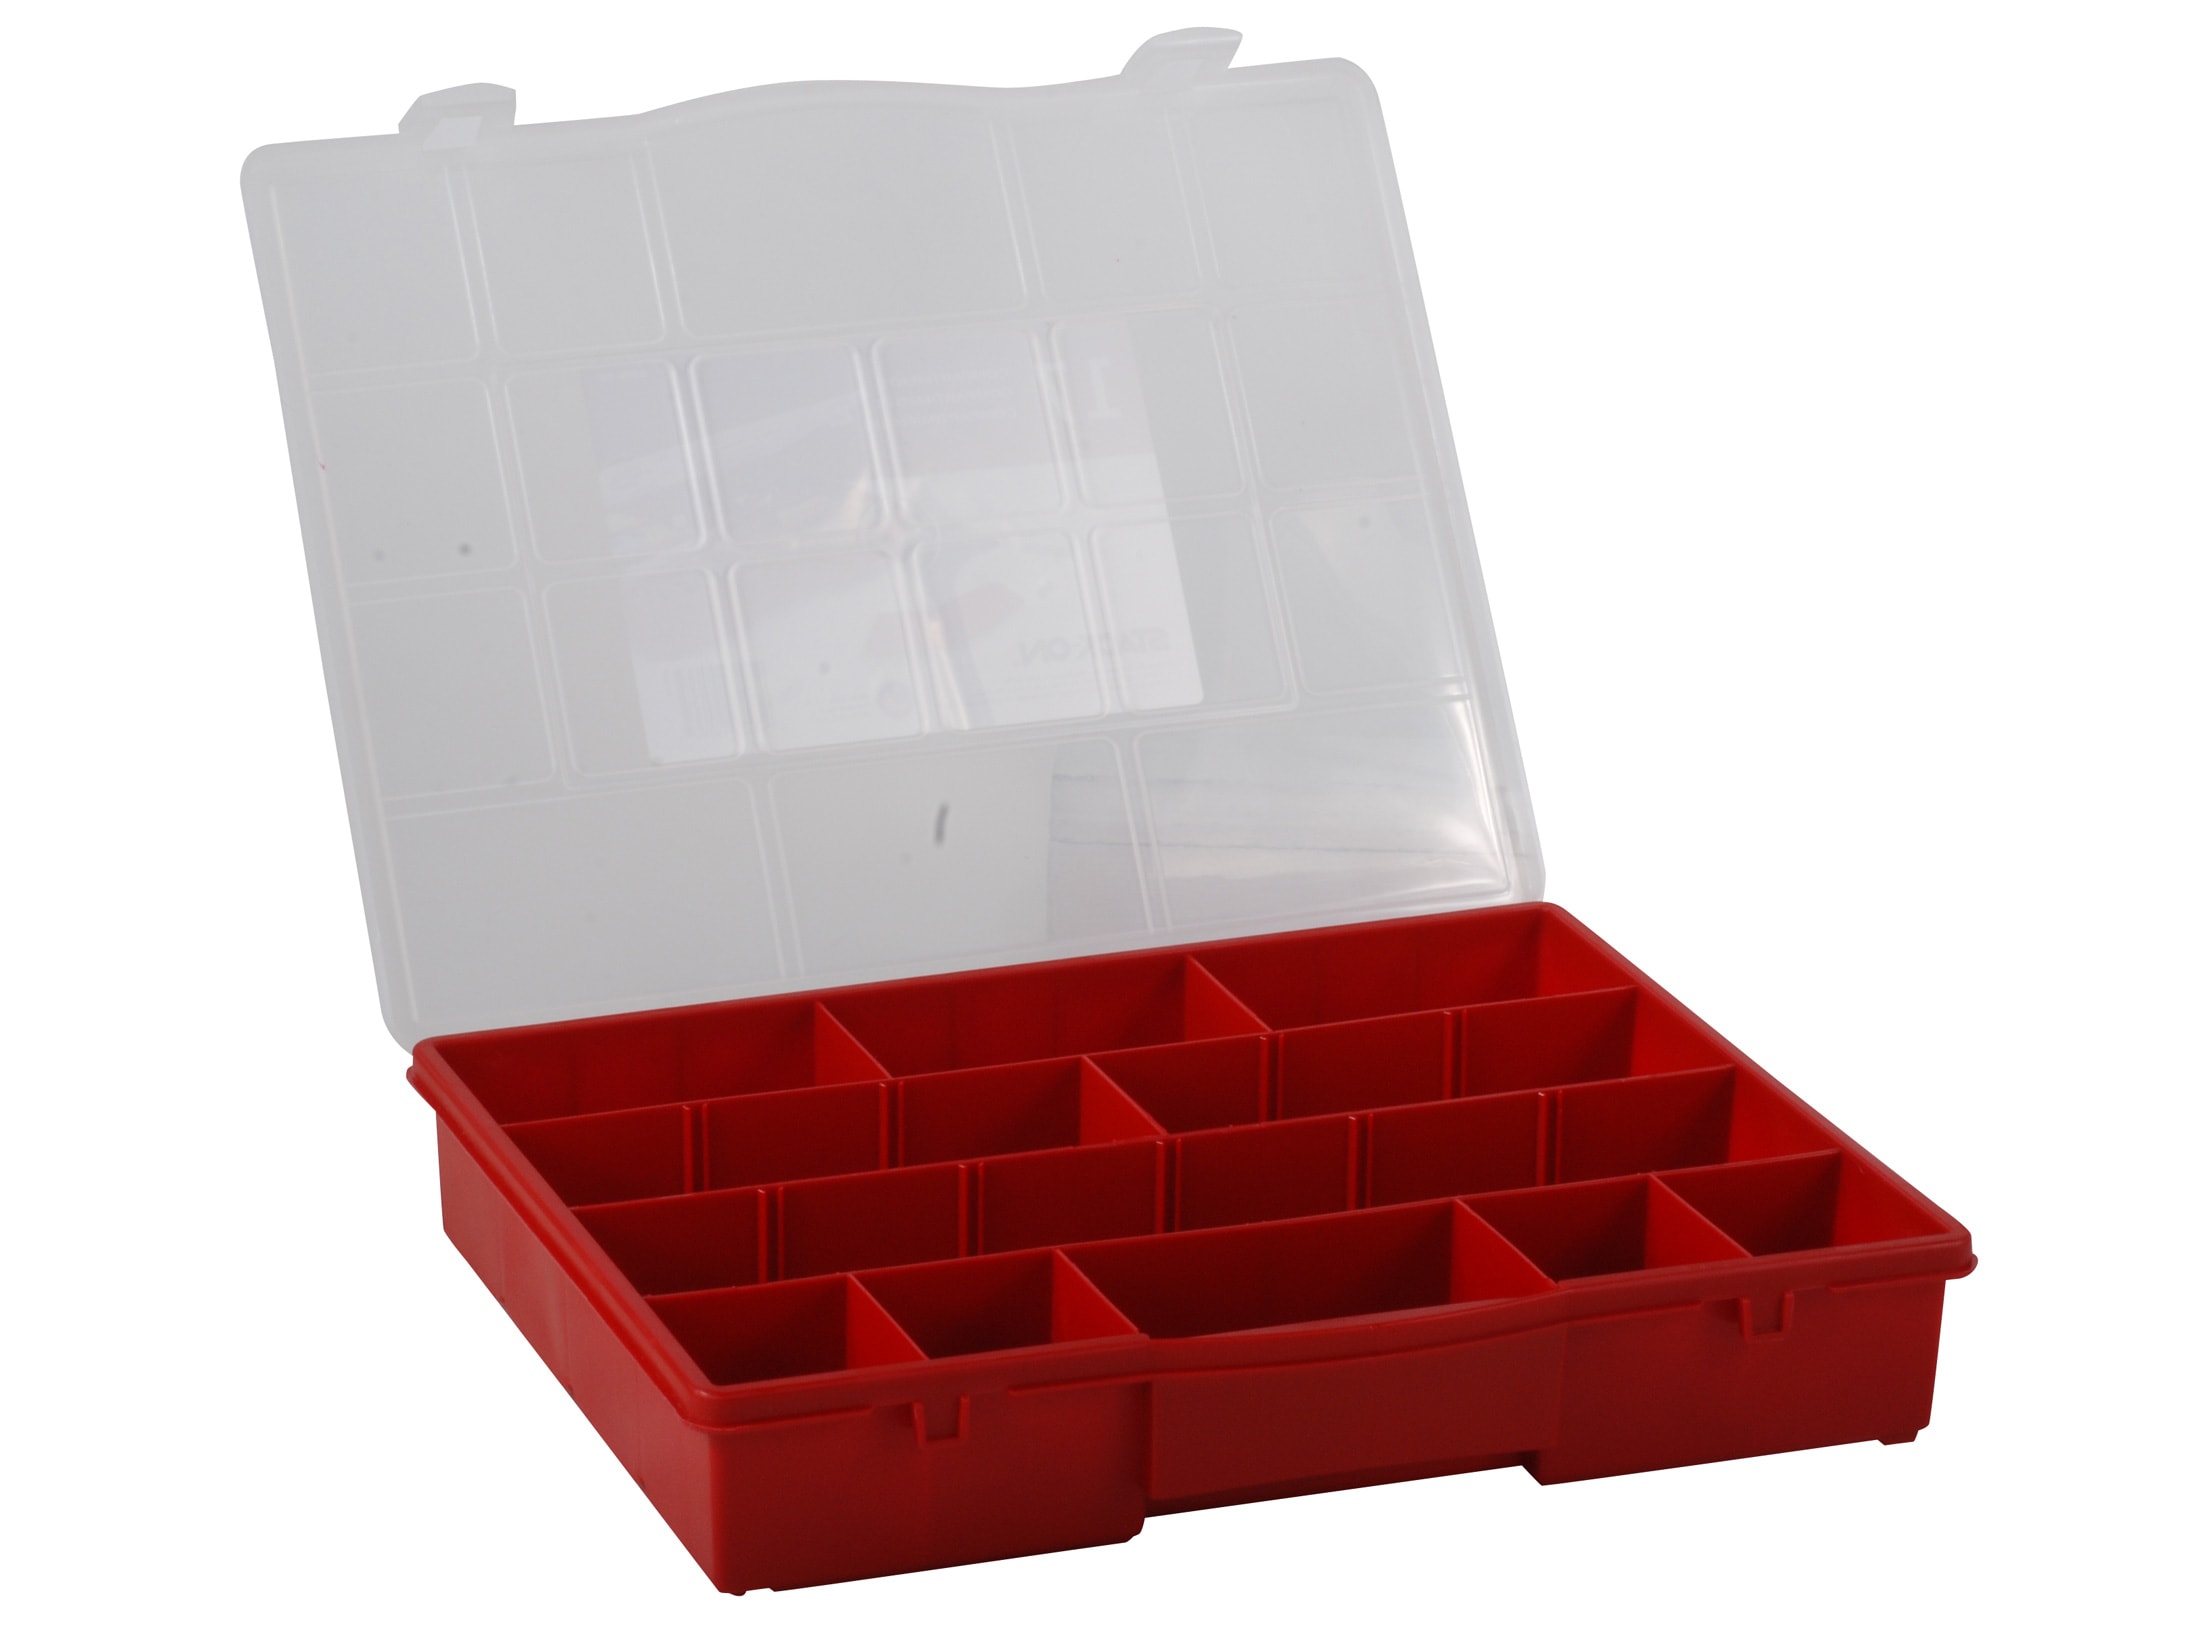 Smd component, small part organizer, Nozzle organizer 4 sections